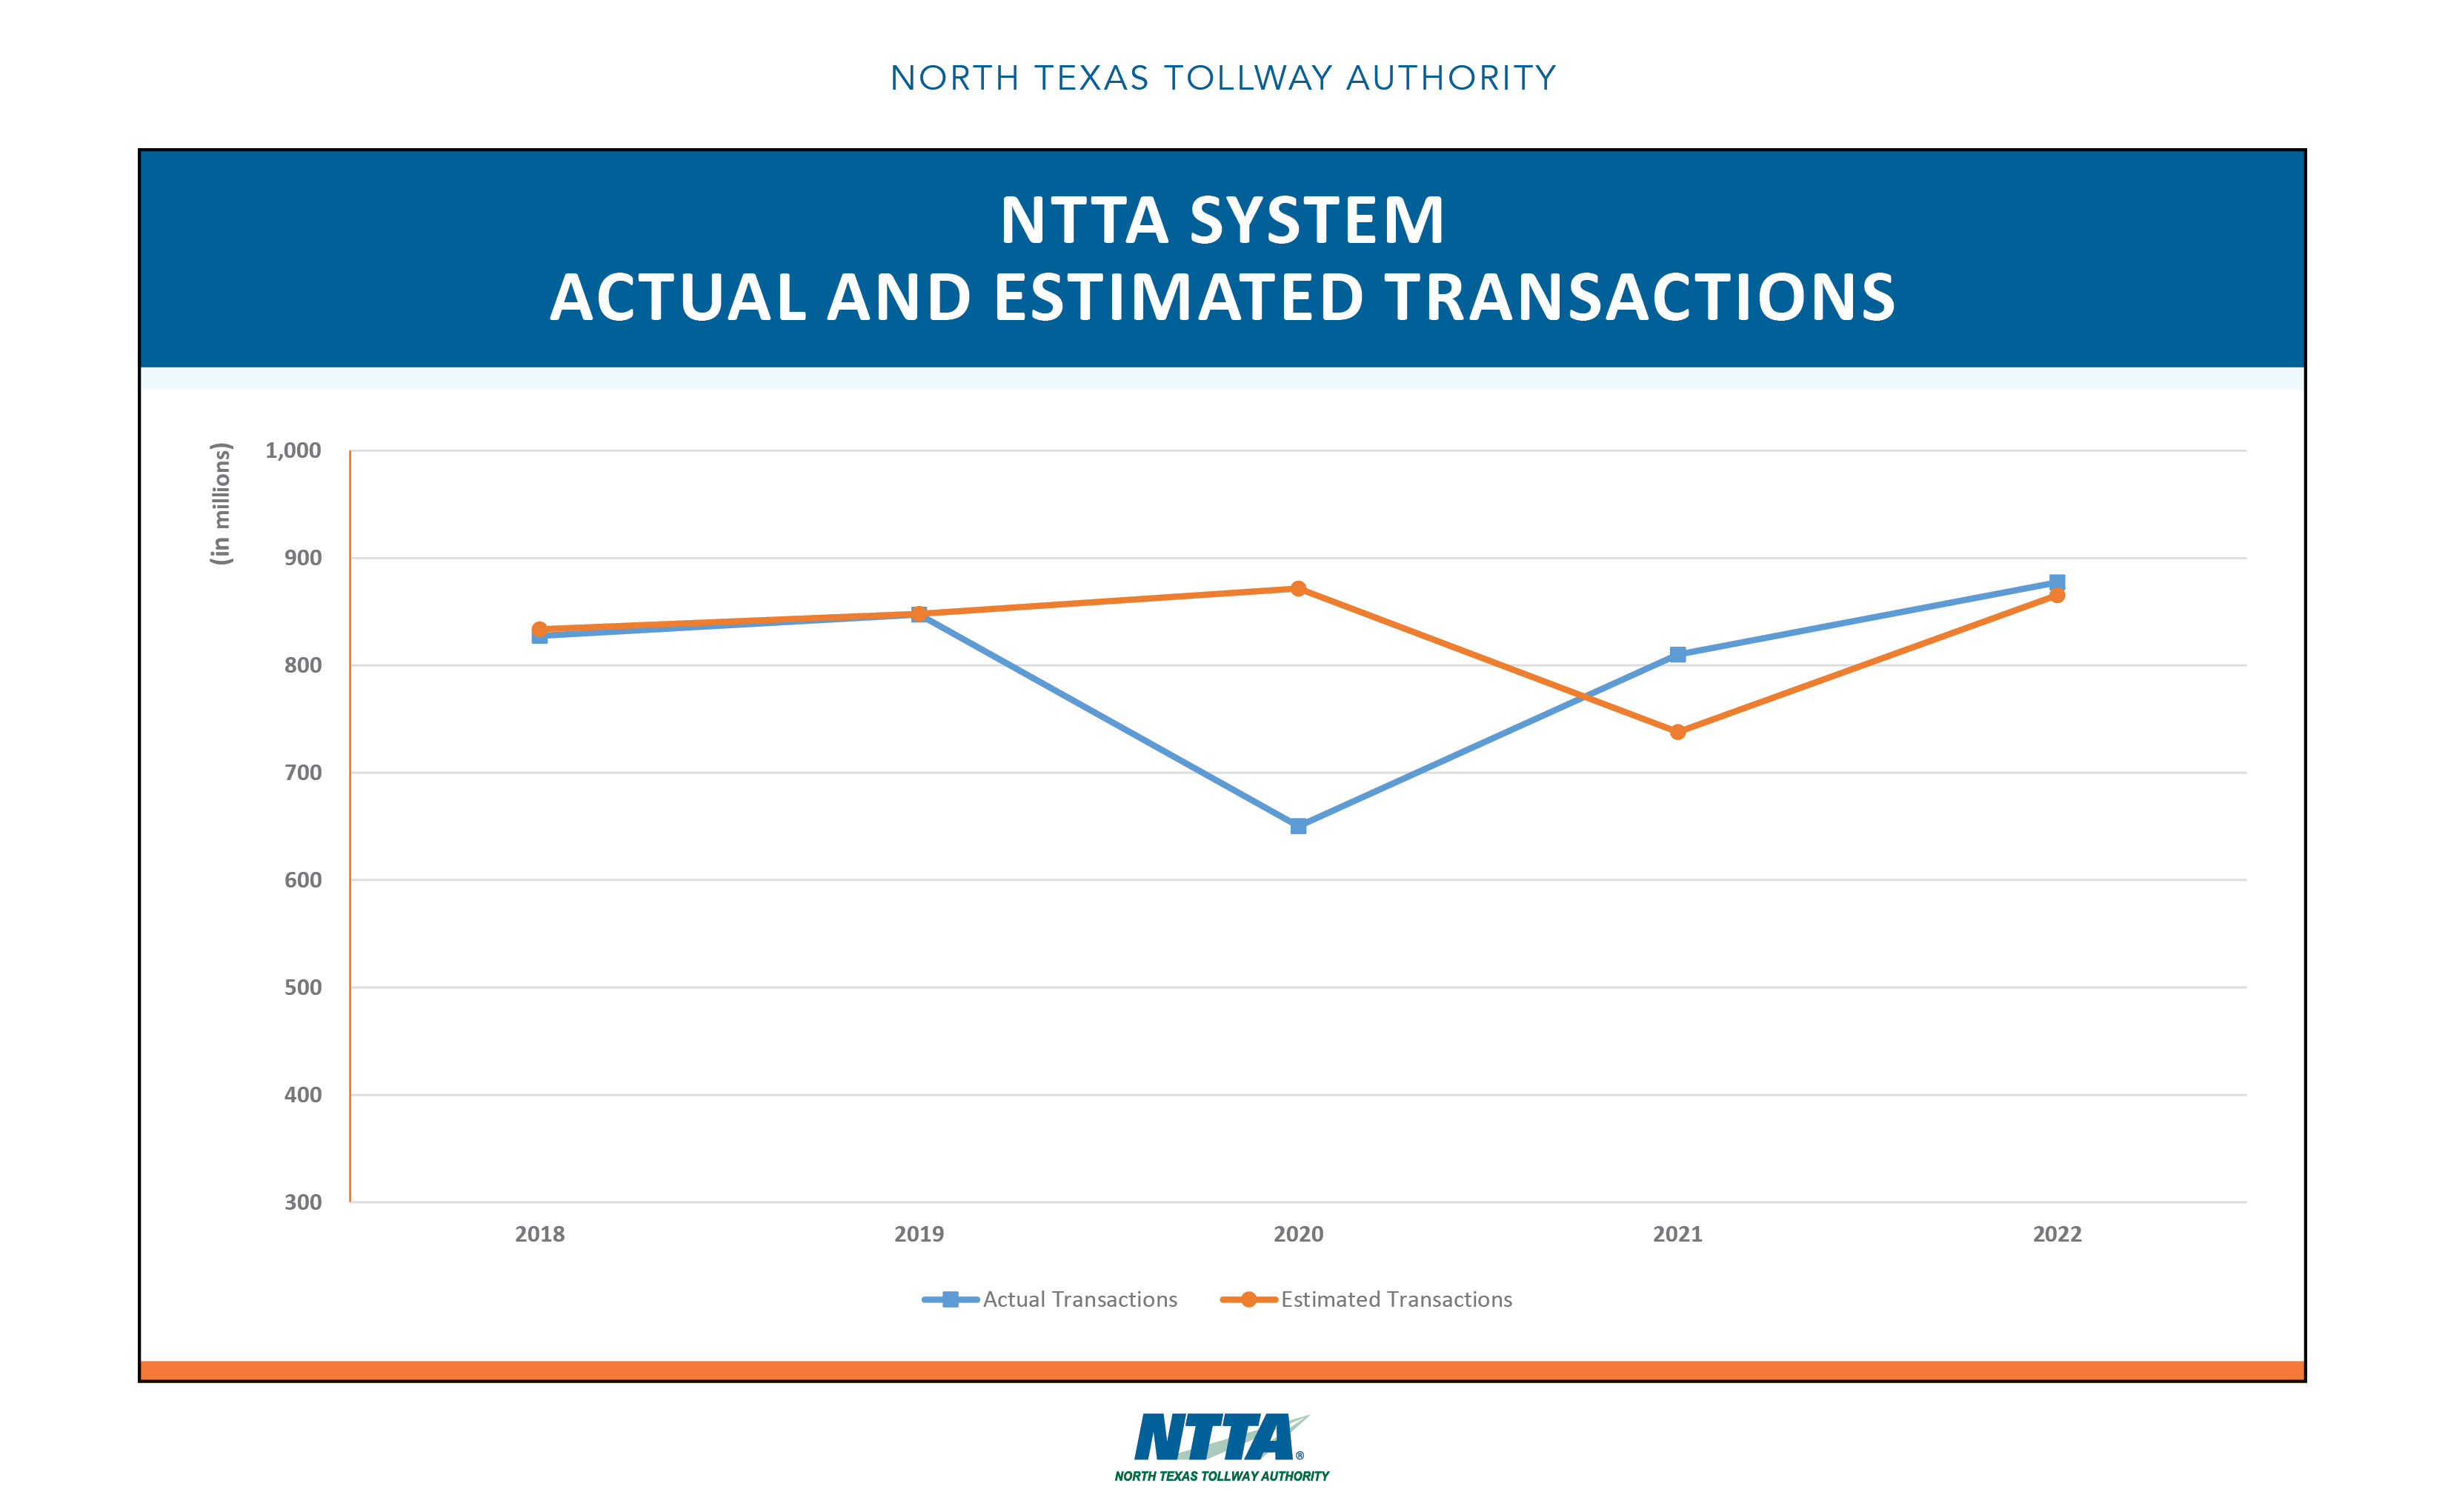 2023 Five-Year Trends - Actual and Estimated Transactions